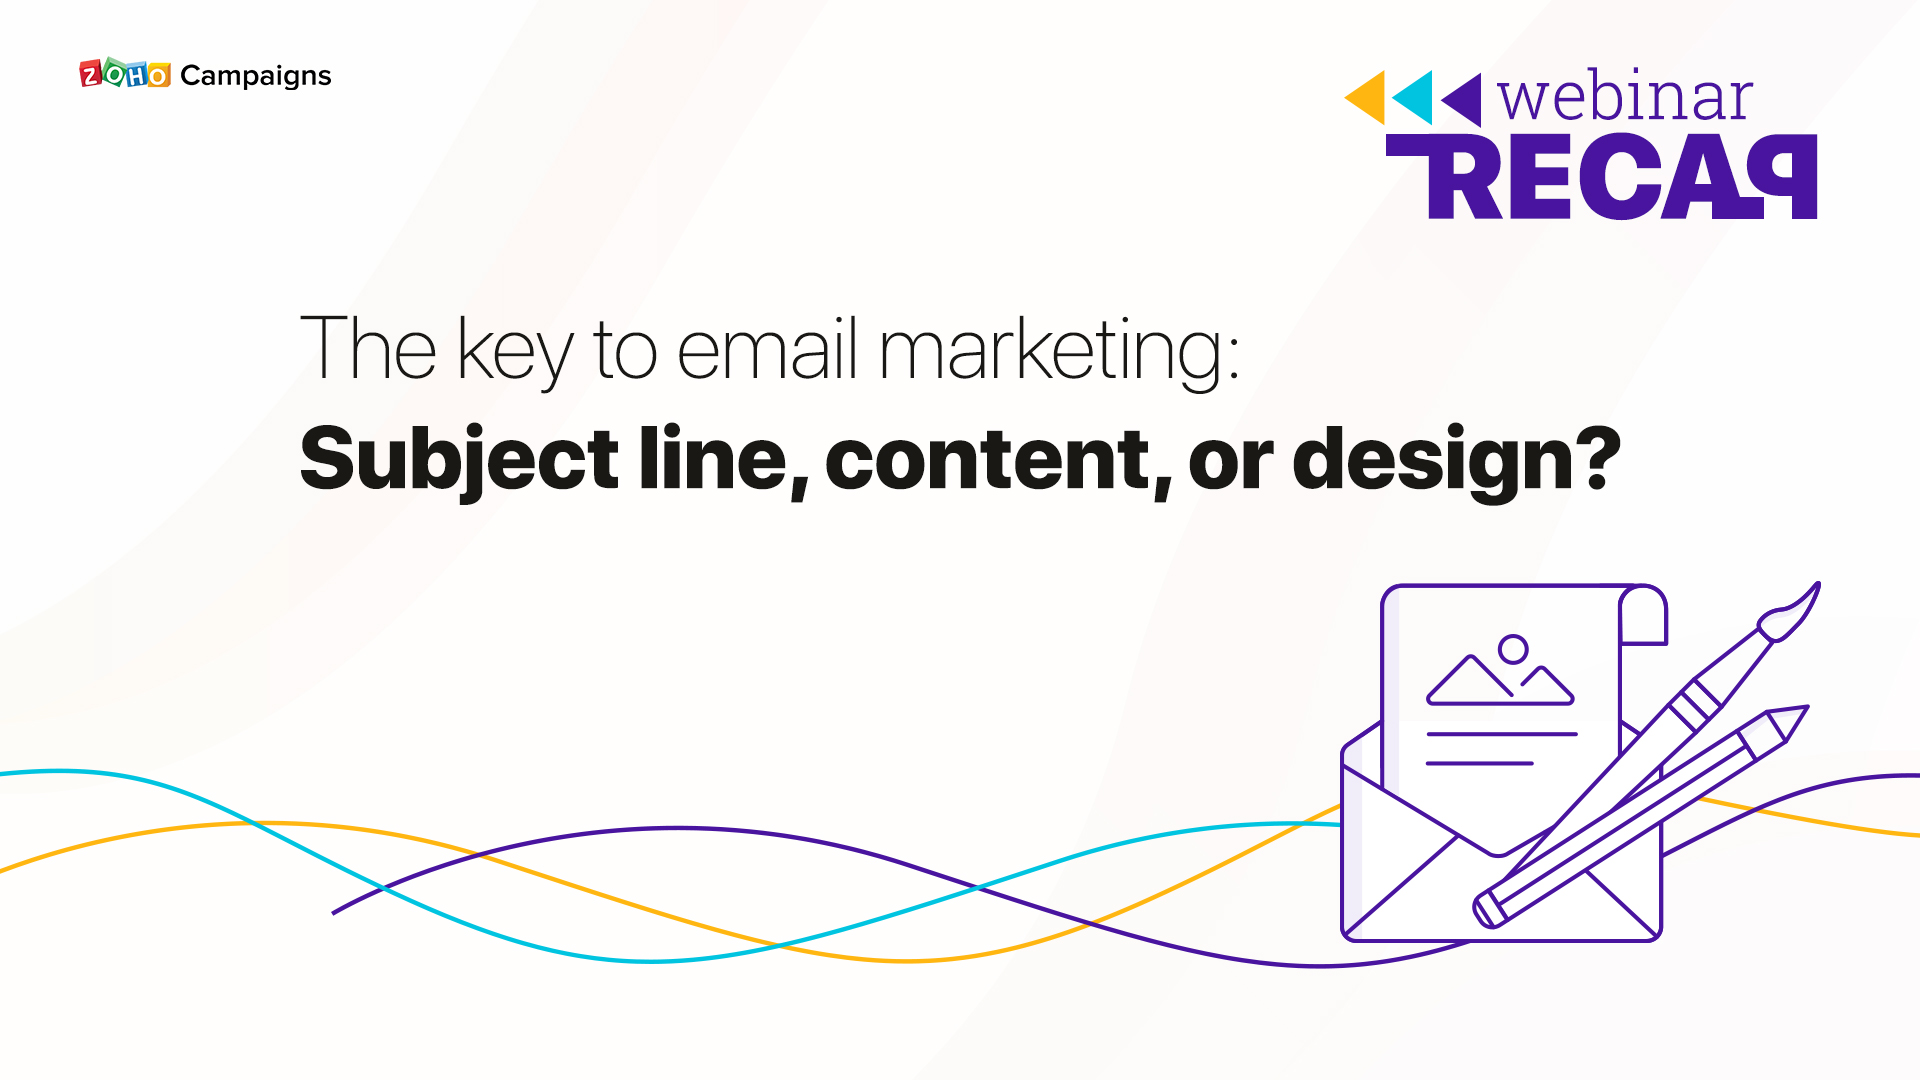 The key to email marketing: Subject line, content, or design?